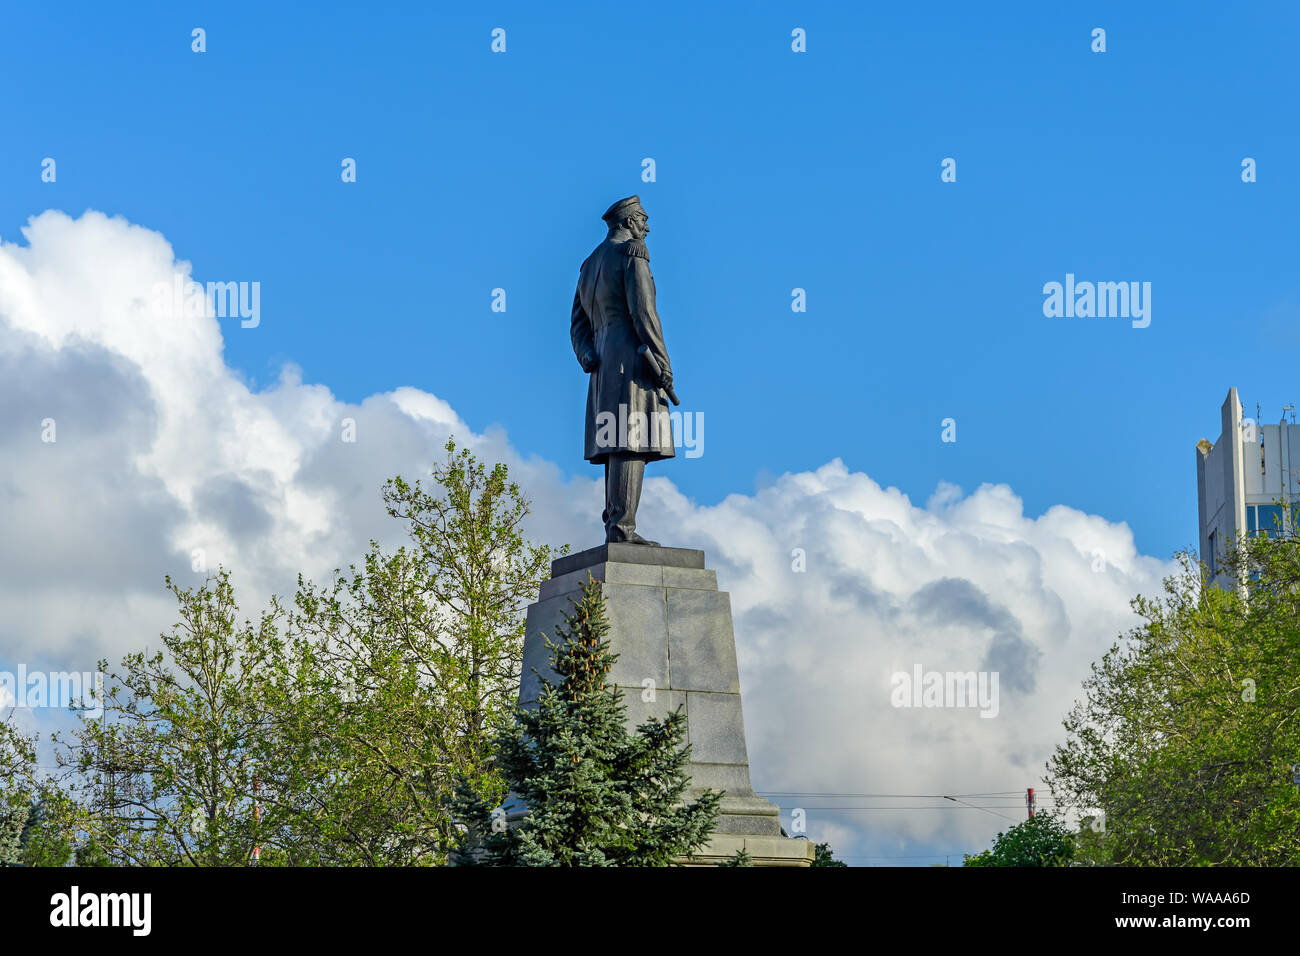 The monument to Admiral Nakhimov on the background of blue sky Stock Photo